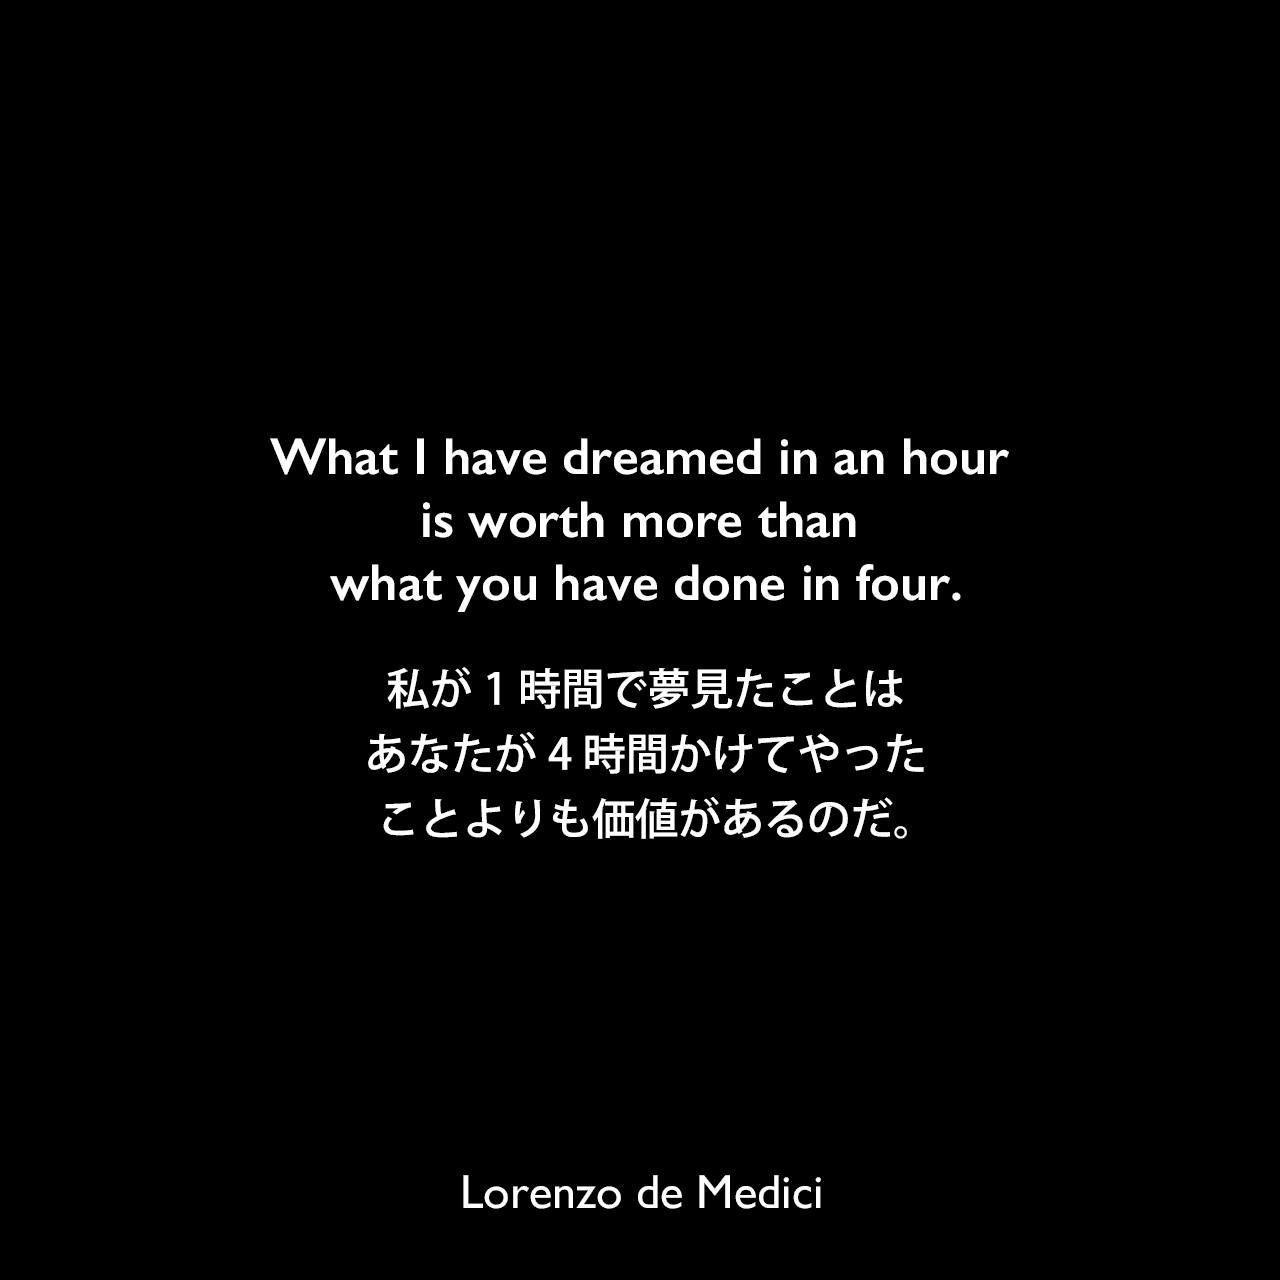 What I have dreamed in an hour is worth more than what you have done in four.私が1時間で夢見たことは、あなたが4時間かけてやったことよりも価値があるのだ。Lorenzo de Medici